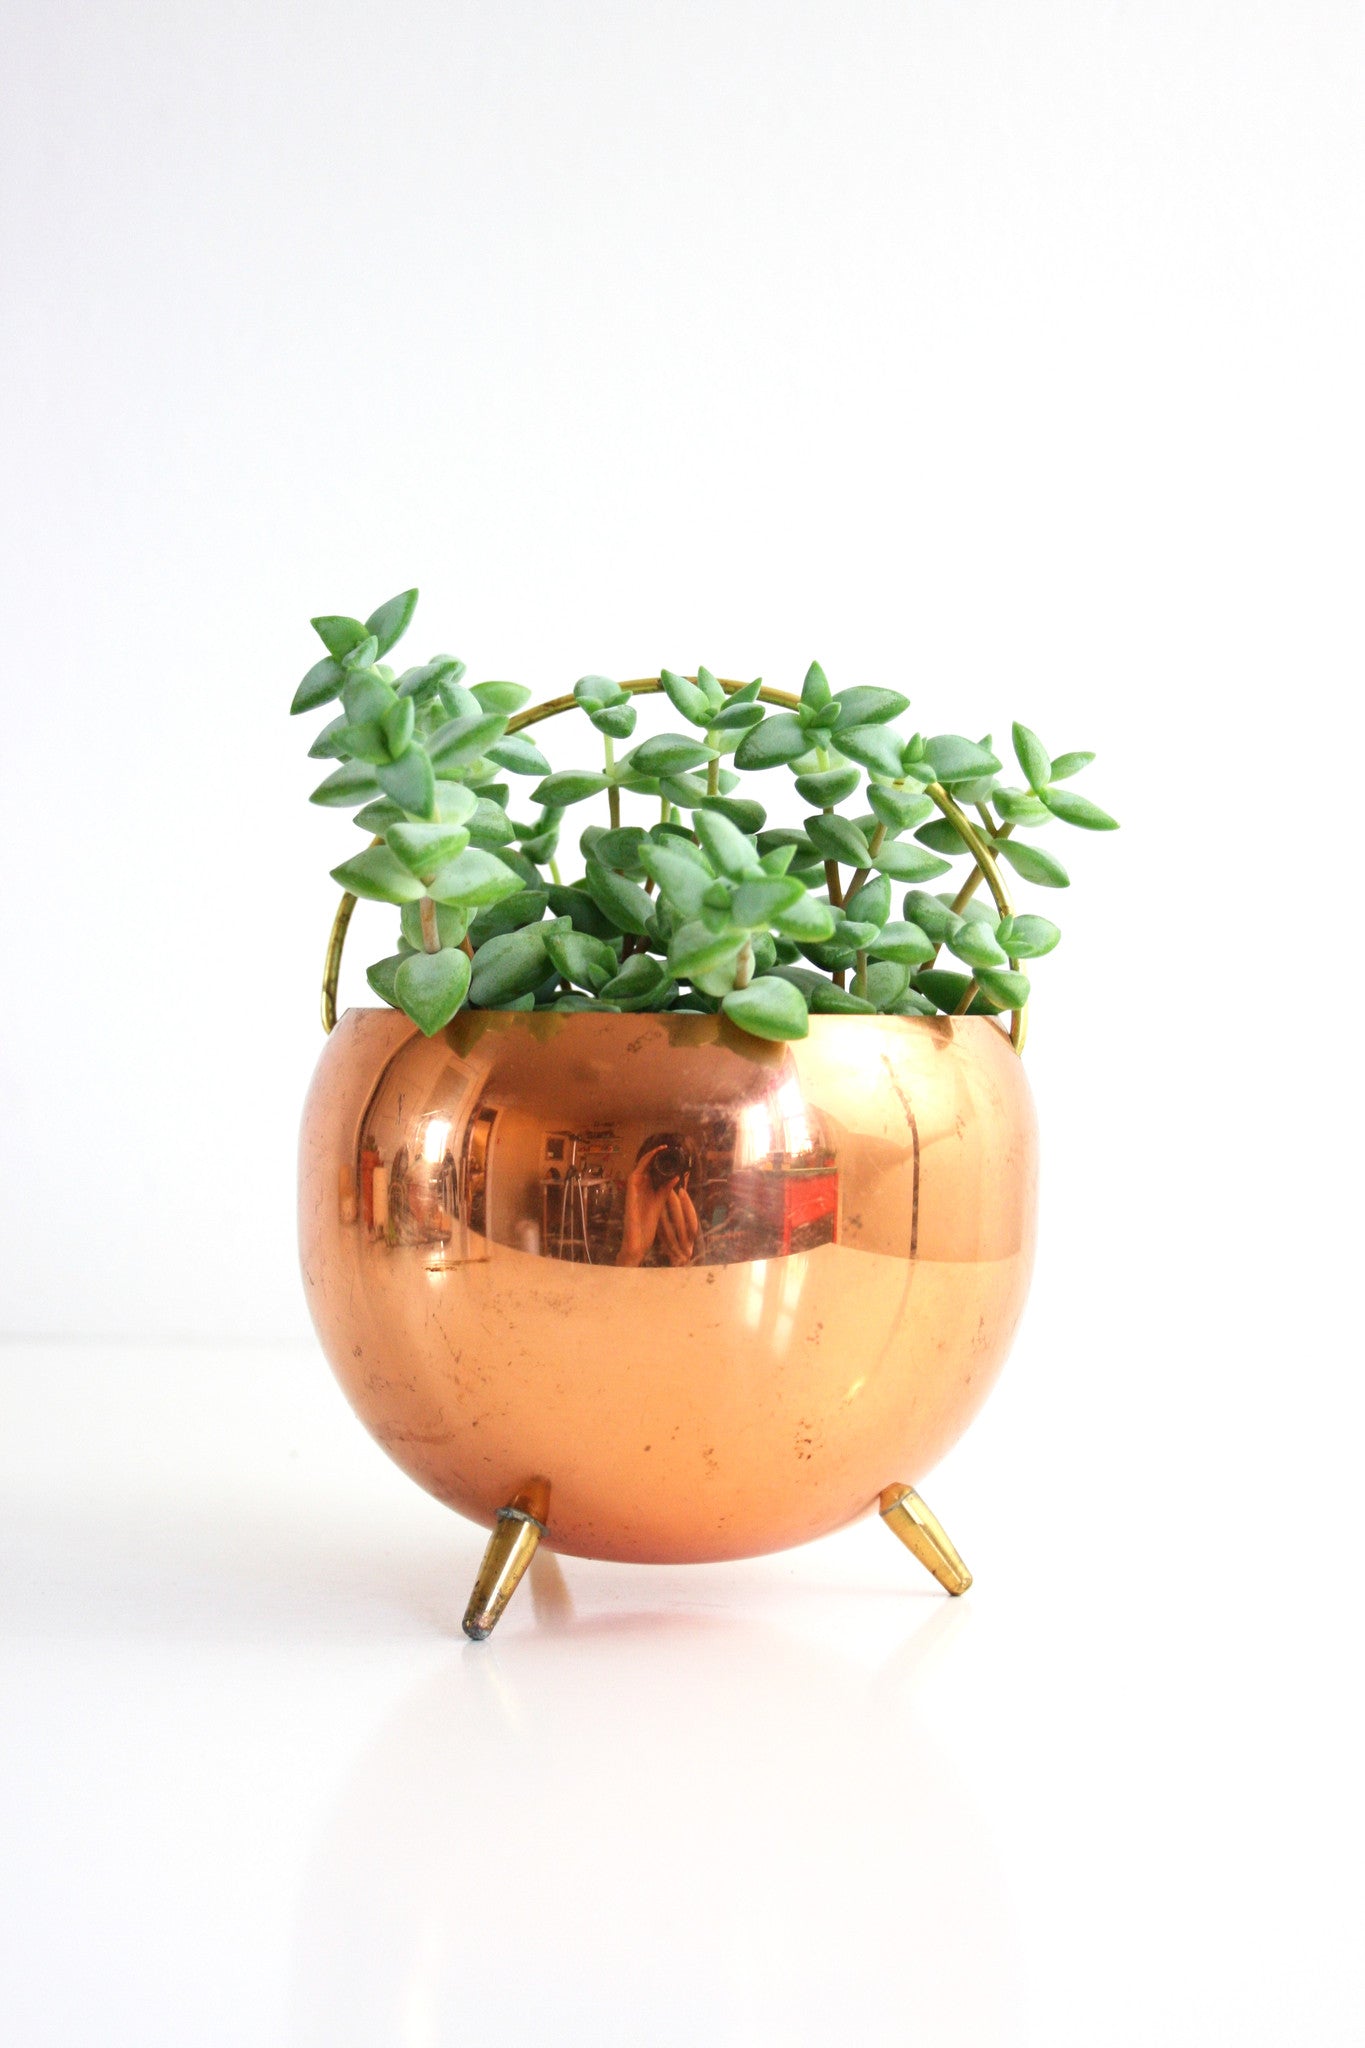 SOLD - Vintage Copper Footed Planter by Coppercraft Guild / Retro Copper and Brass Plant Pot